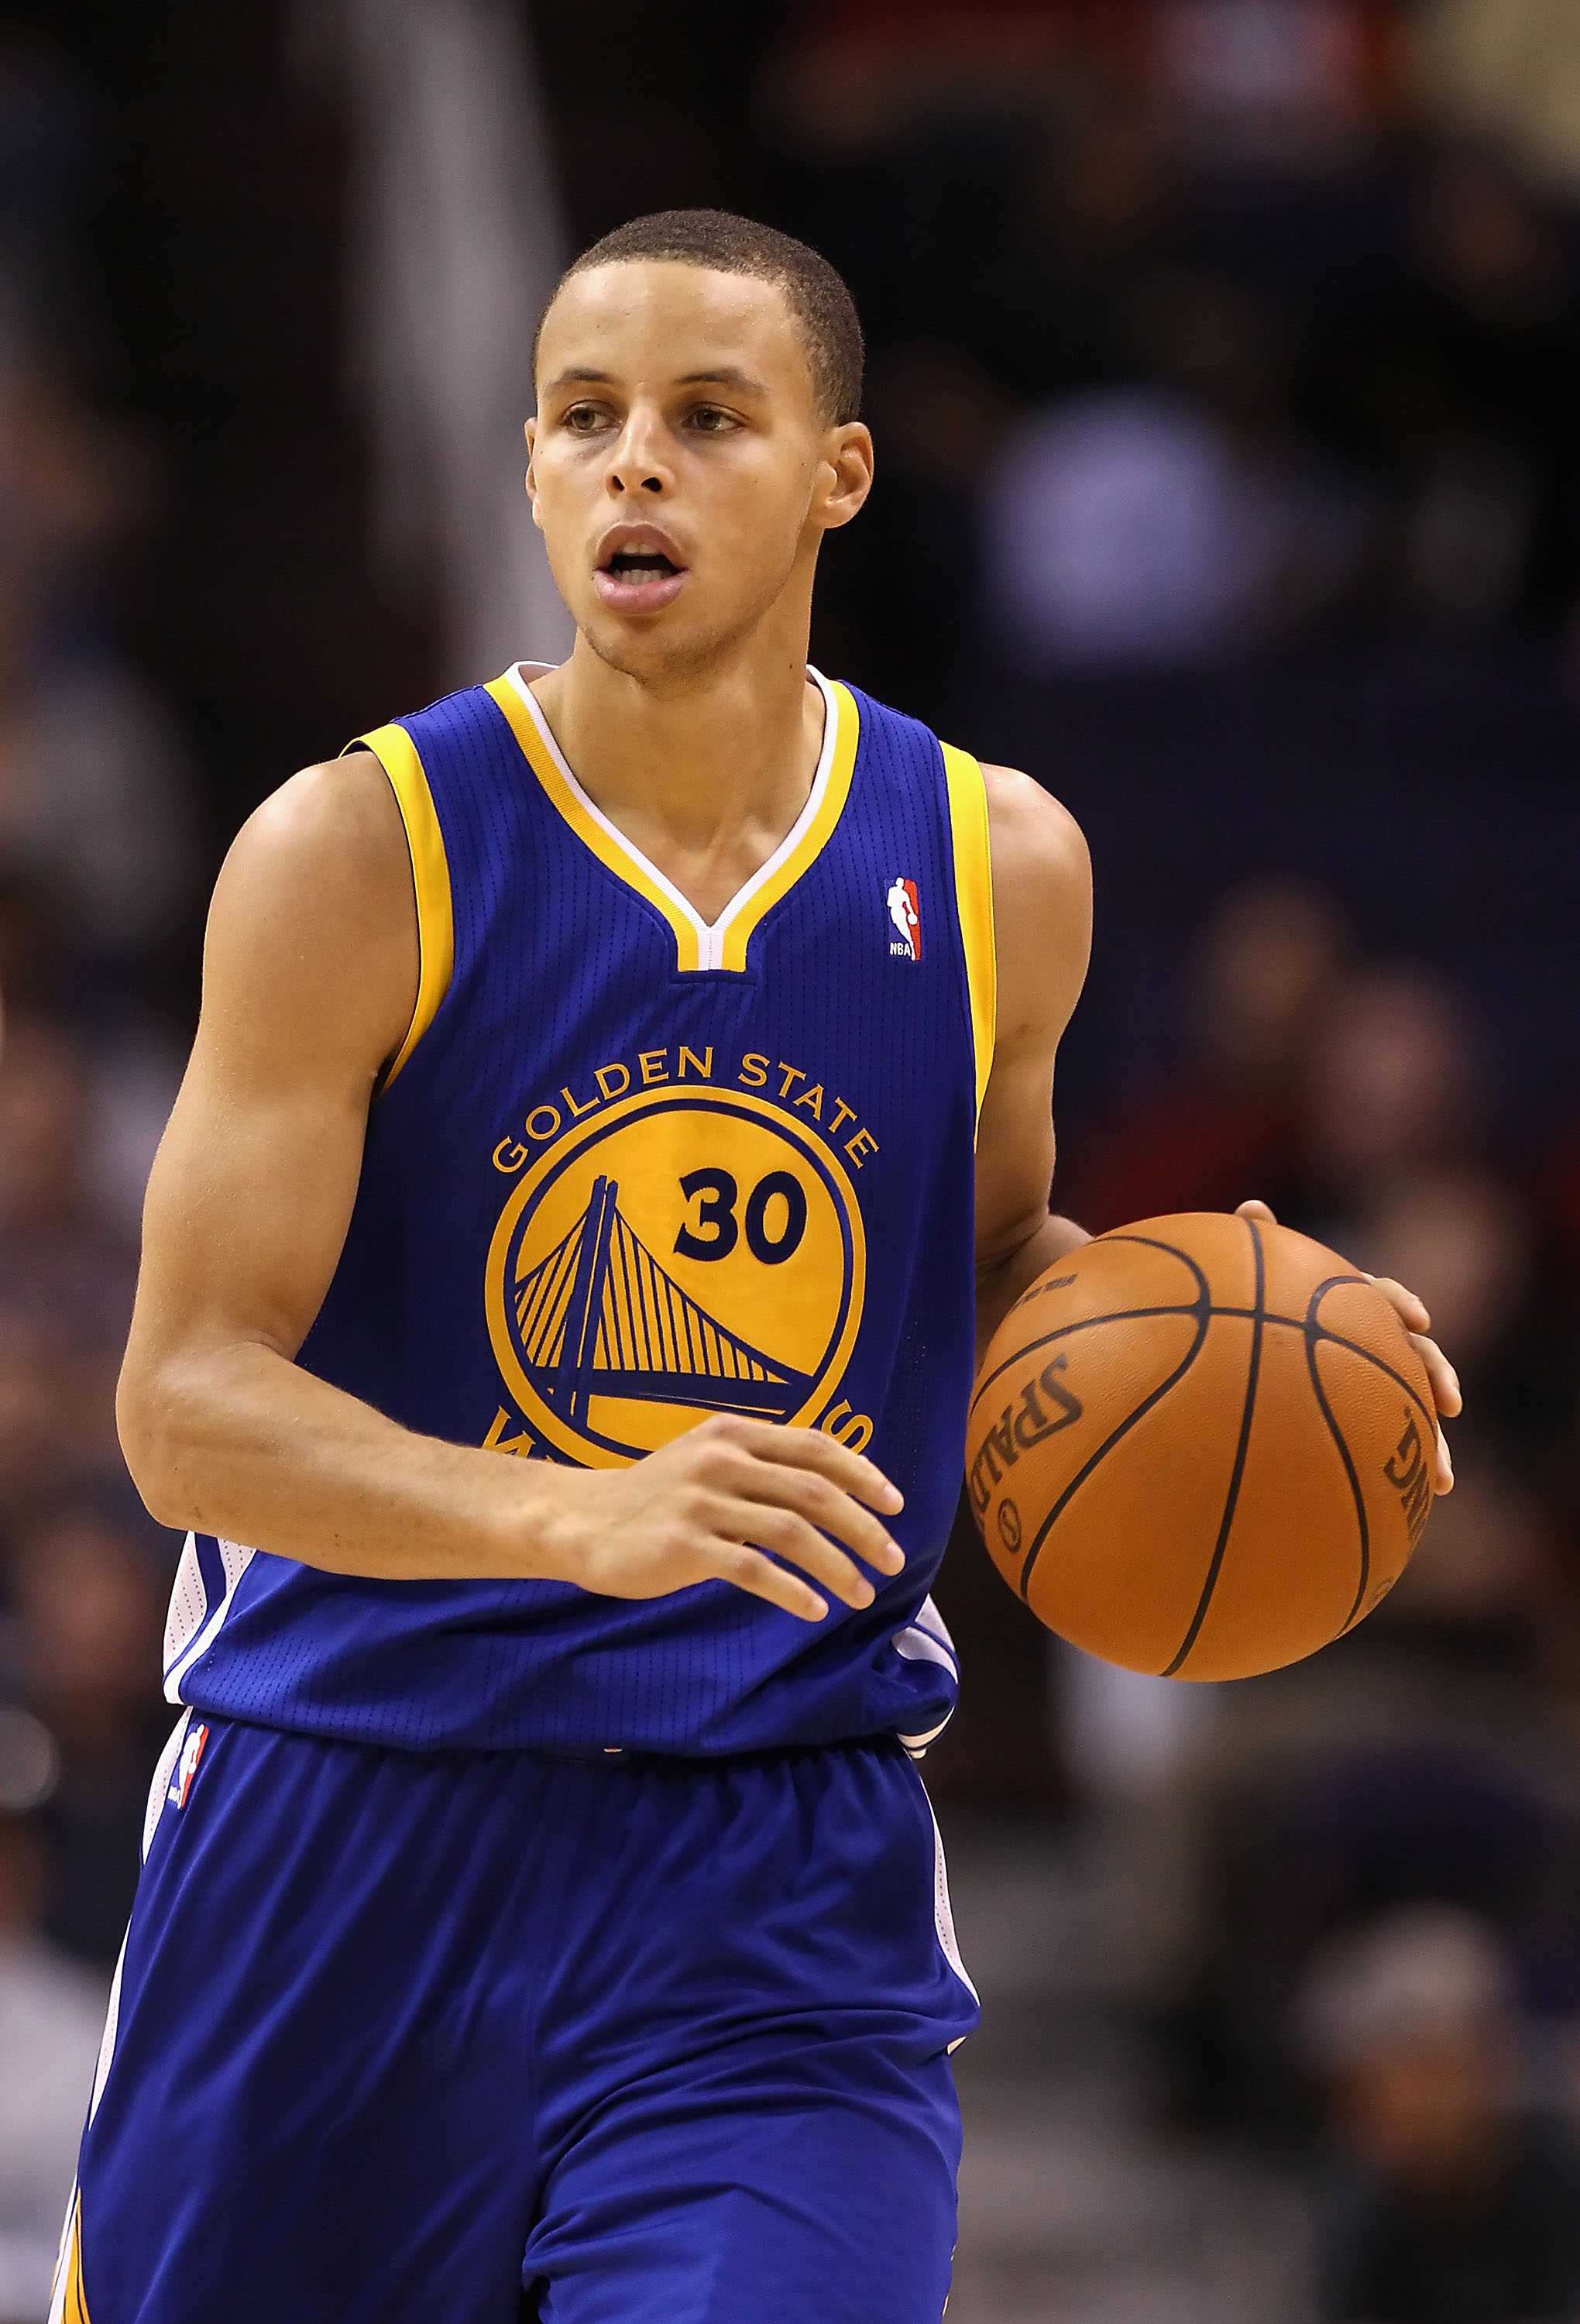 PHOENIX - OCTOBER 19:  Stephen Curry #30 of the Golden State Warriors handles the ball during the preseason NBA game against the Phoenix Suns at US Airways Center on October 19, 2010 in Phoenix, Arizona. NOTE TO USER: User expressly acknowledges and agree